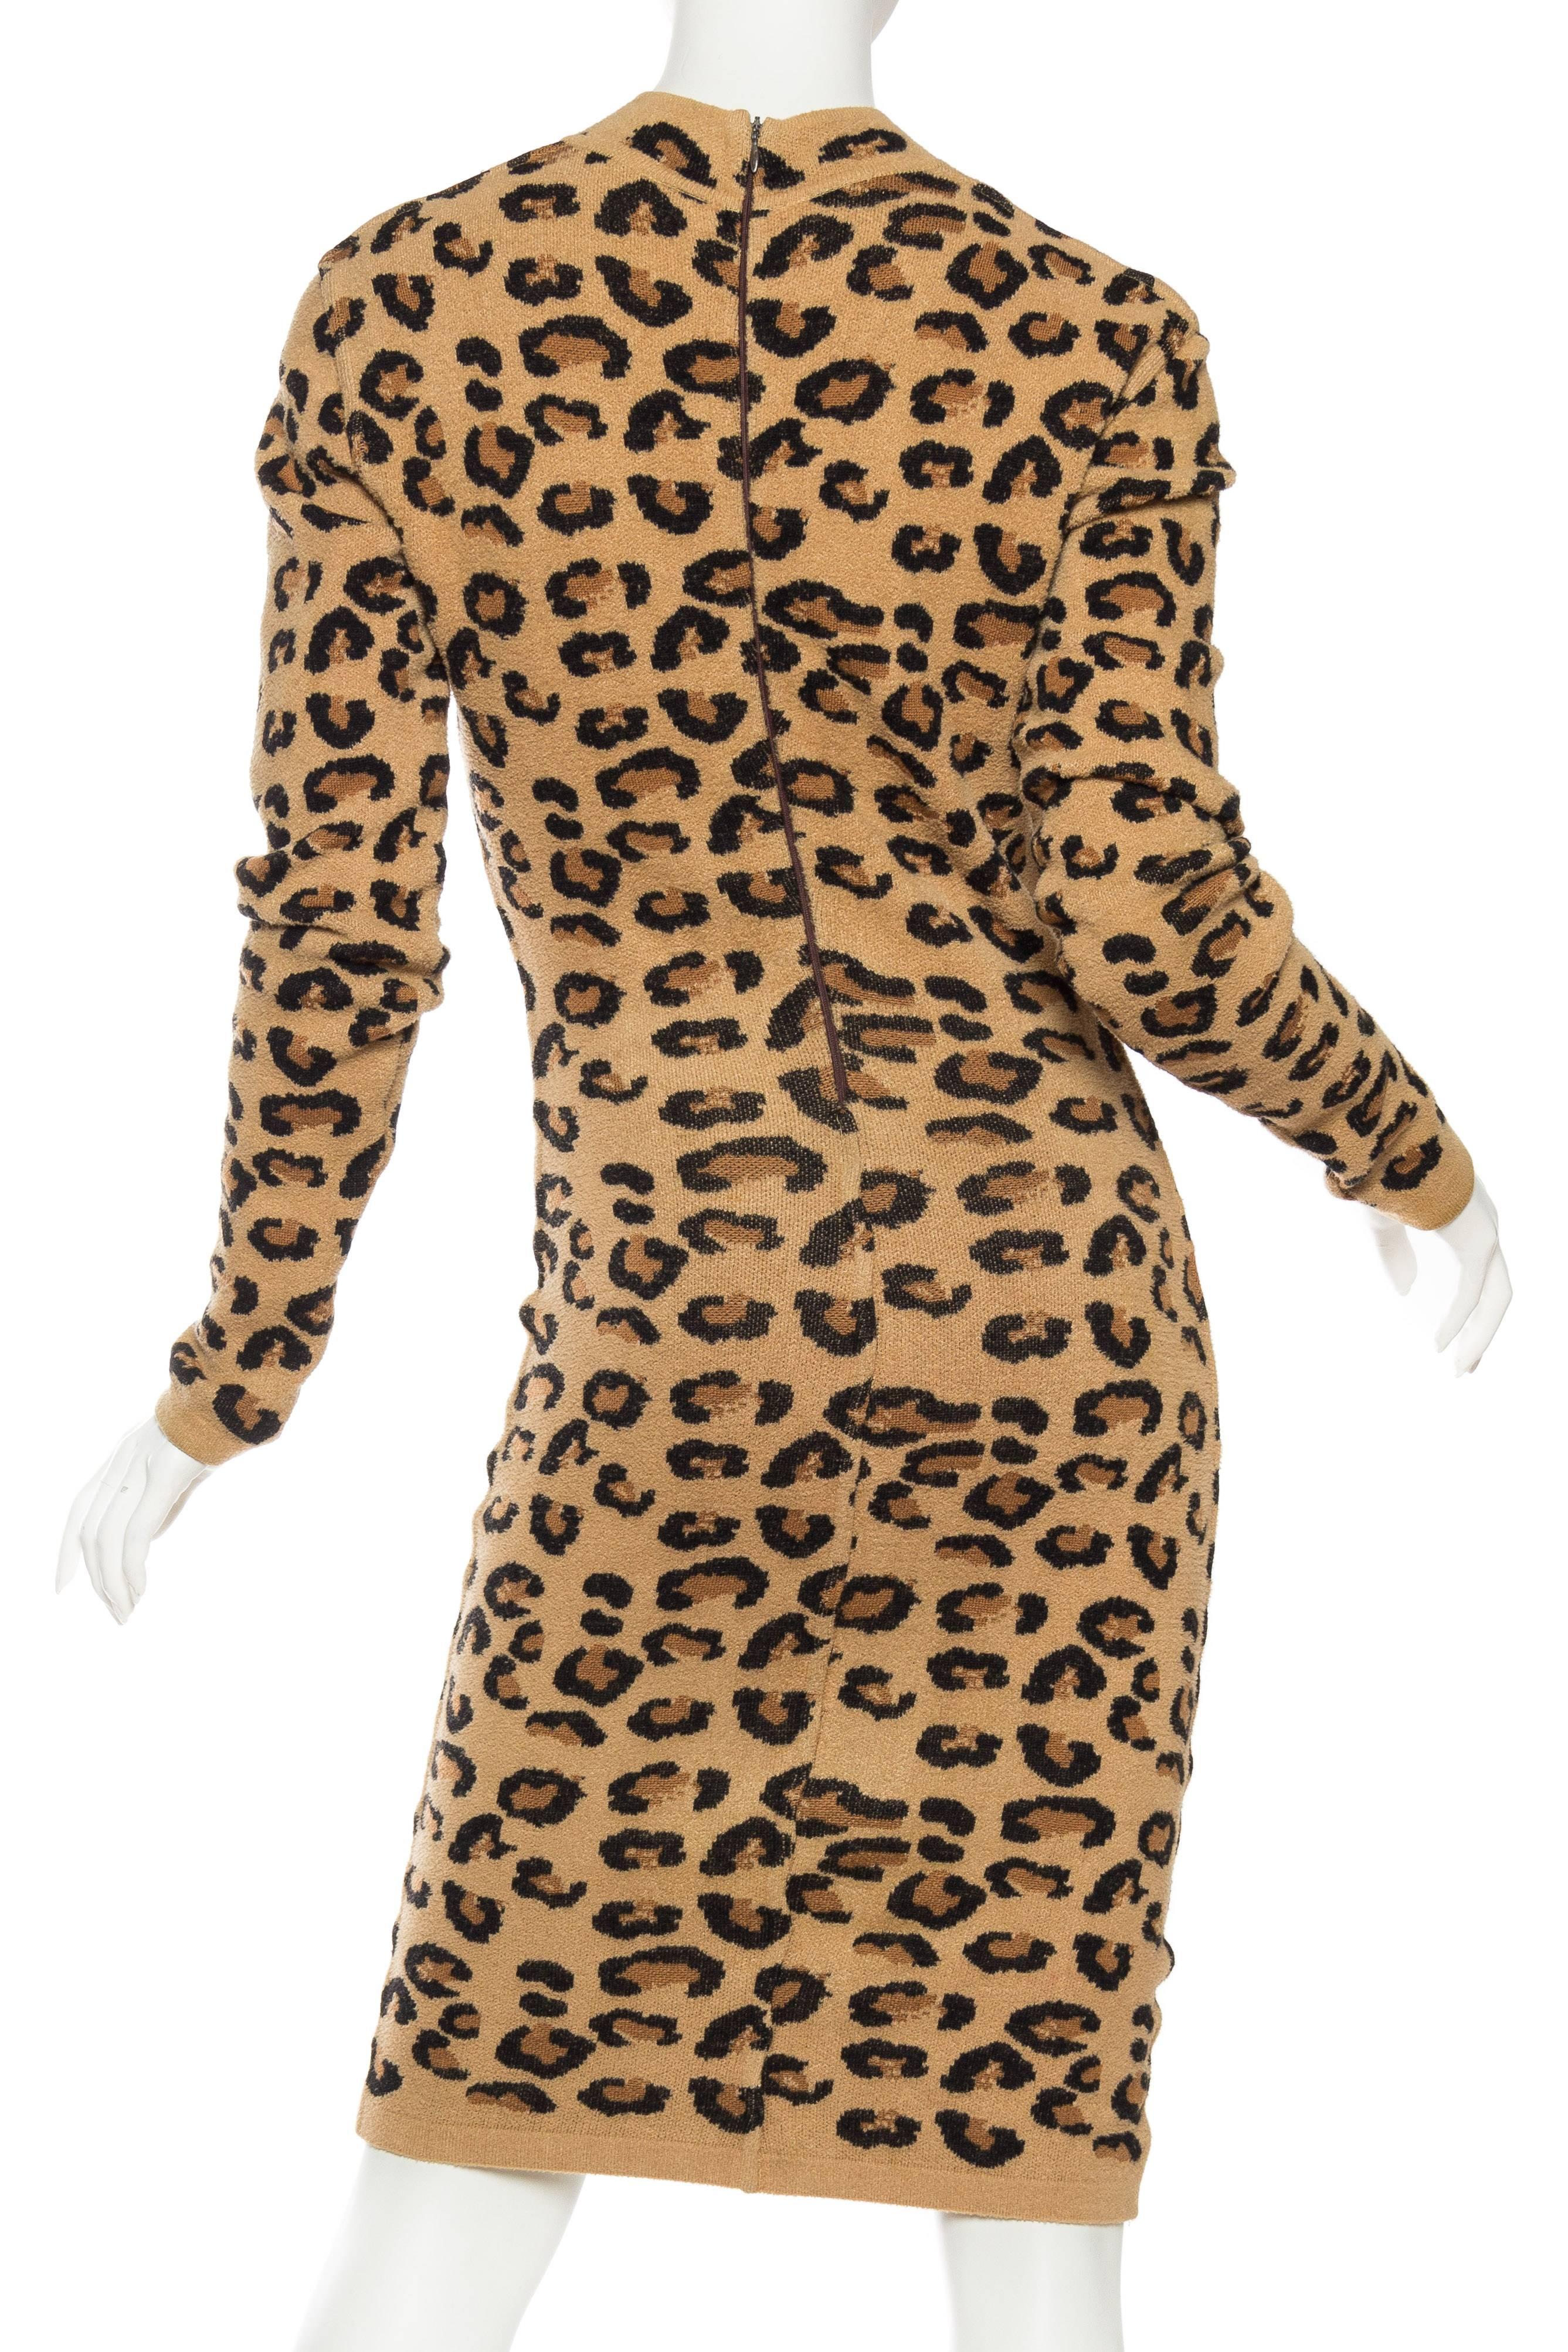 AZZEDINE ALAIA Wool Blend Knit Iconic 1991 Leopard Collection Dress In Excellent Condition In New York, NY